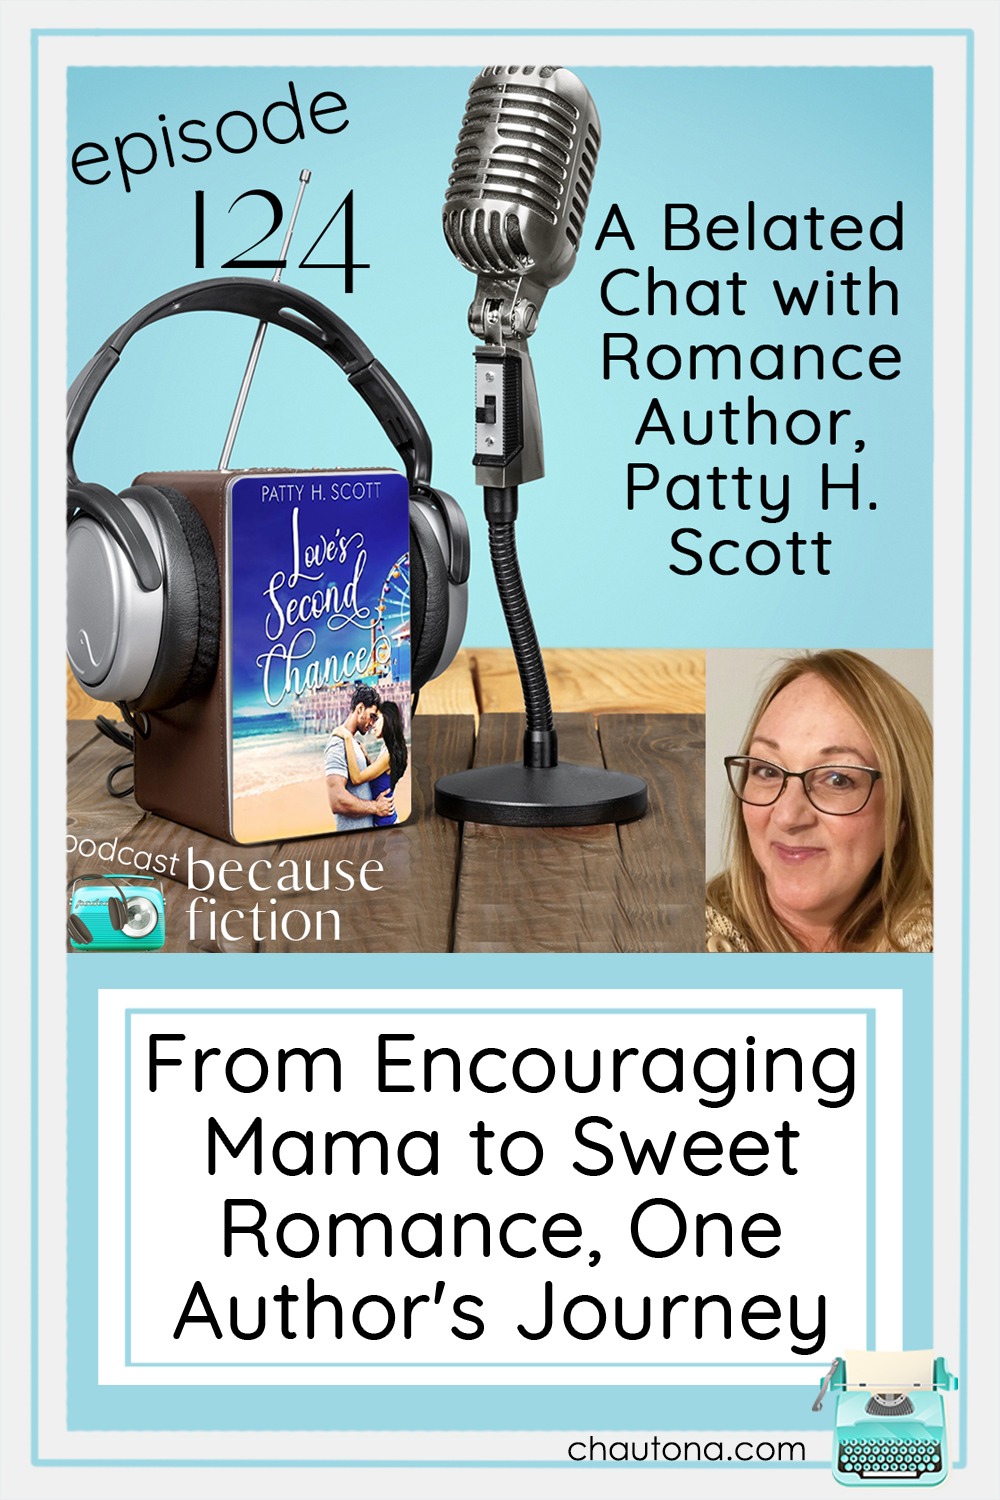 Patty H. Scott burst onto the Christian & sweet romance scene with two delightful series just two years ago. Find out how she started and why. via @chautonahavig